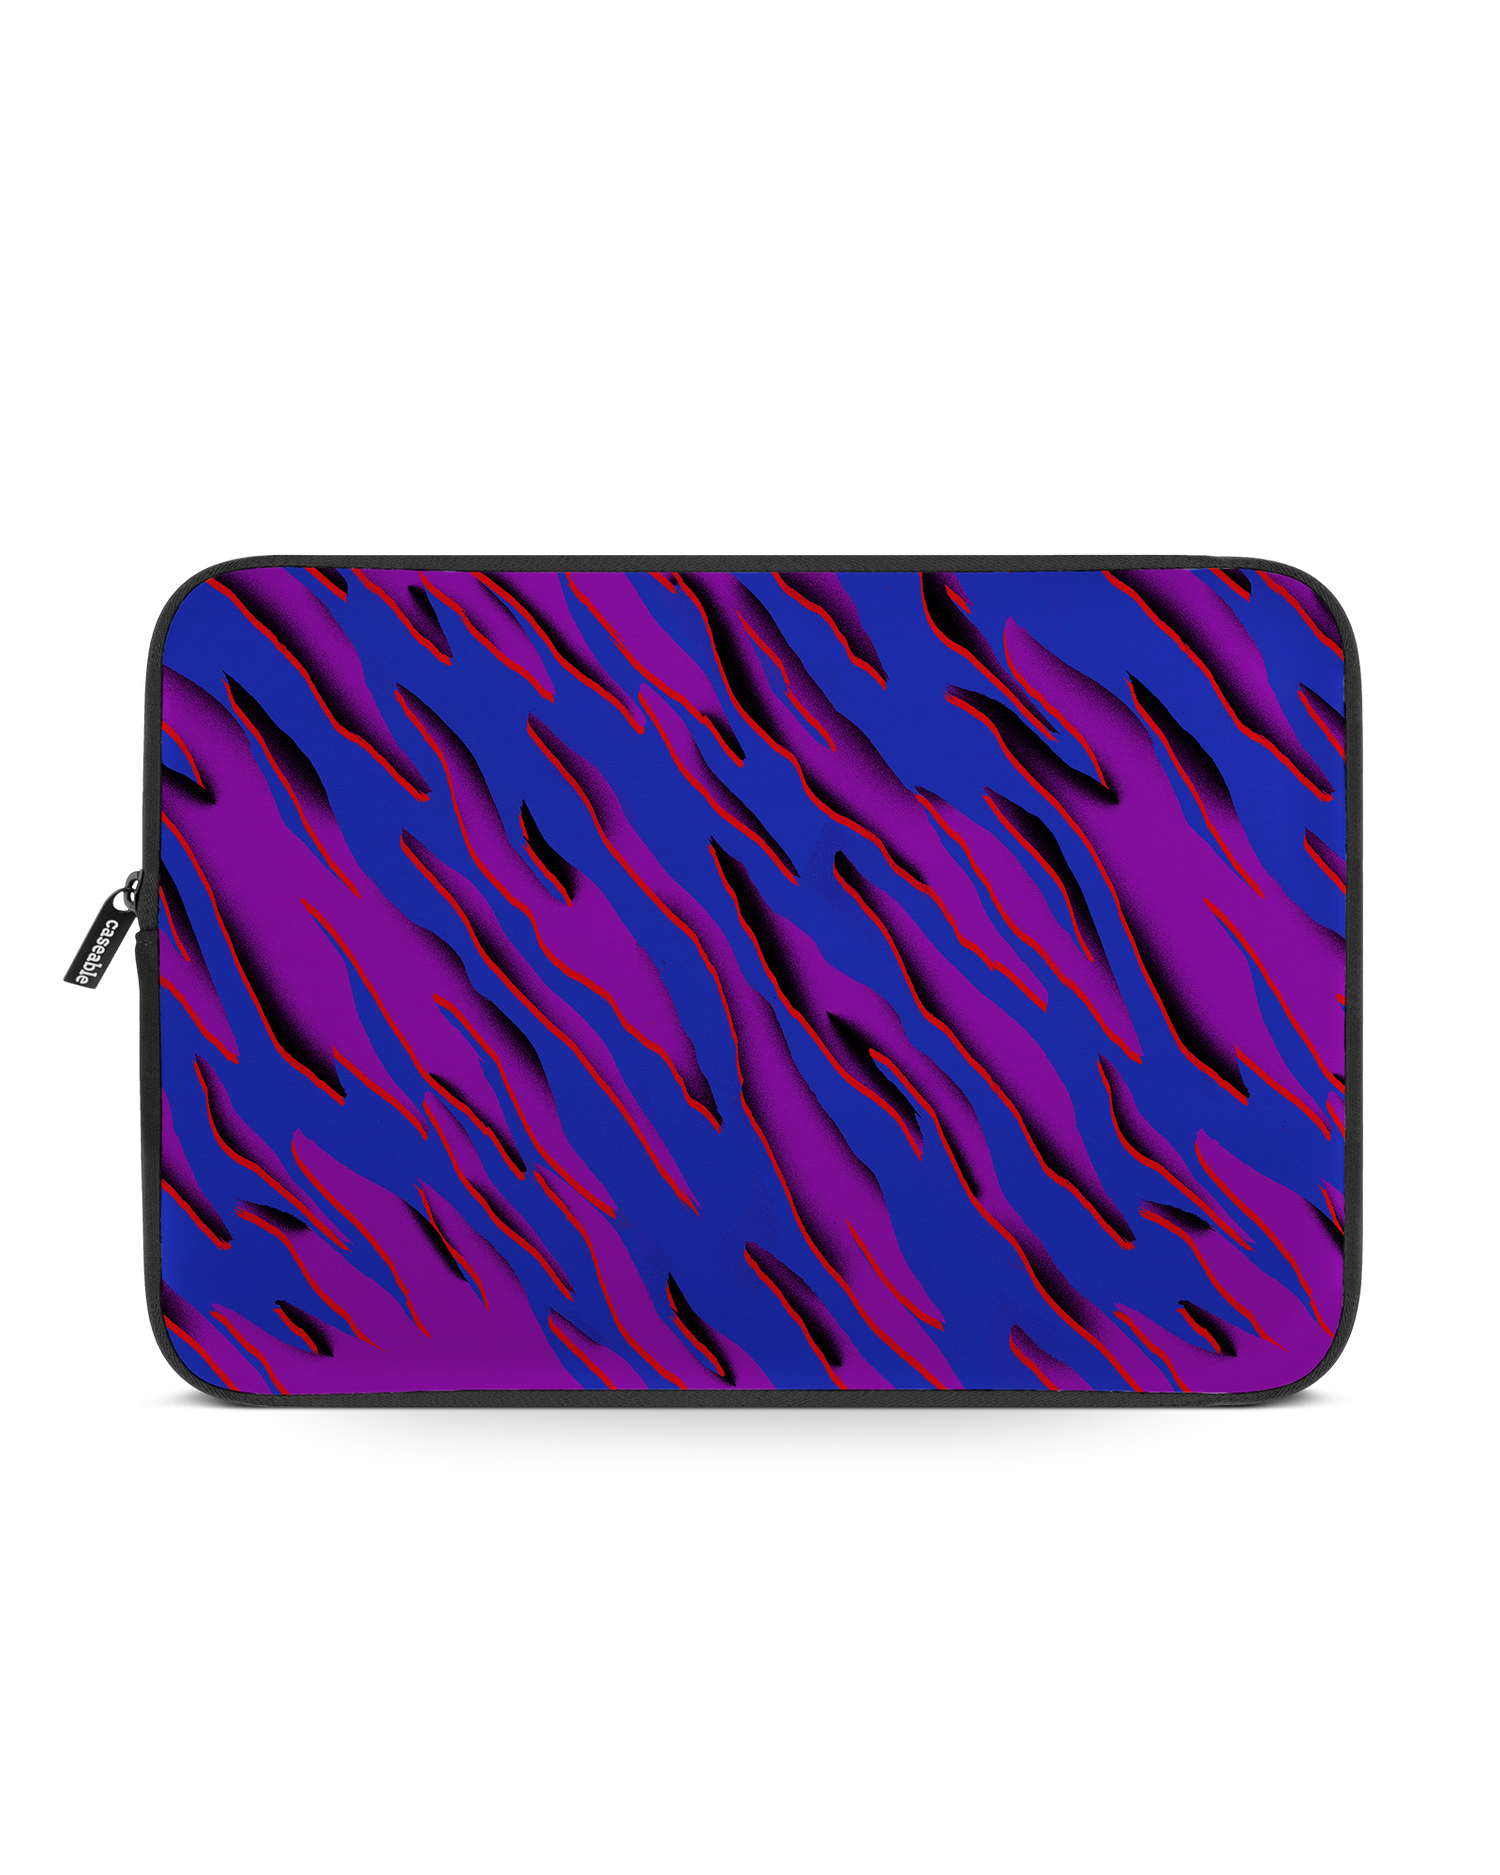 Electric Ocean 2 Laptop Case 14 inch: Front View